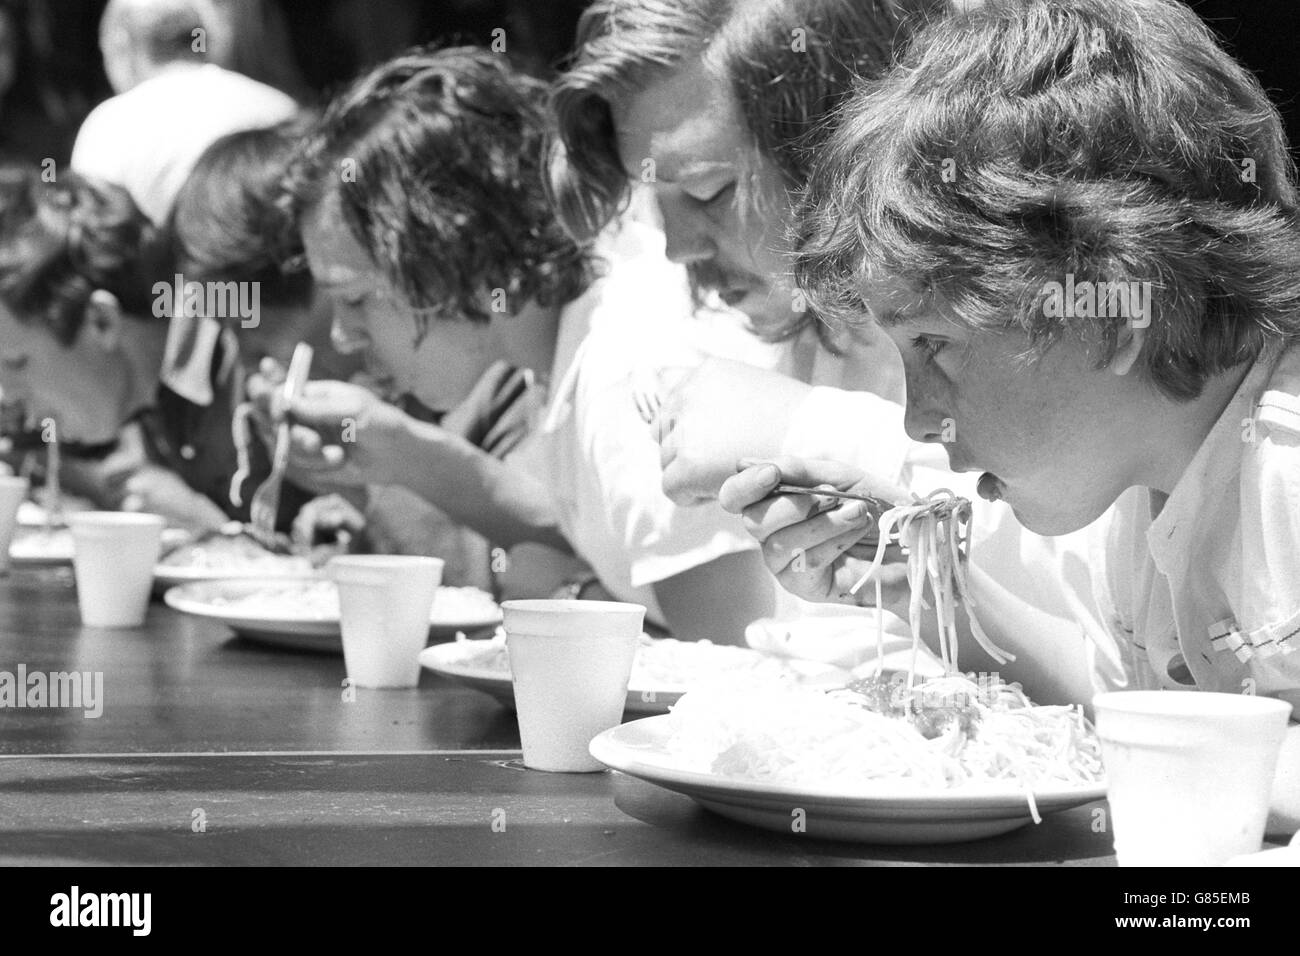 Competitors in a spaghetti-eating contest during the Soho Festival in London. Stock Photo